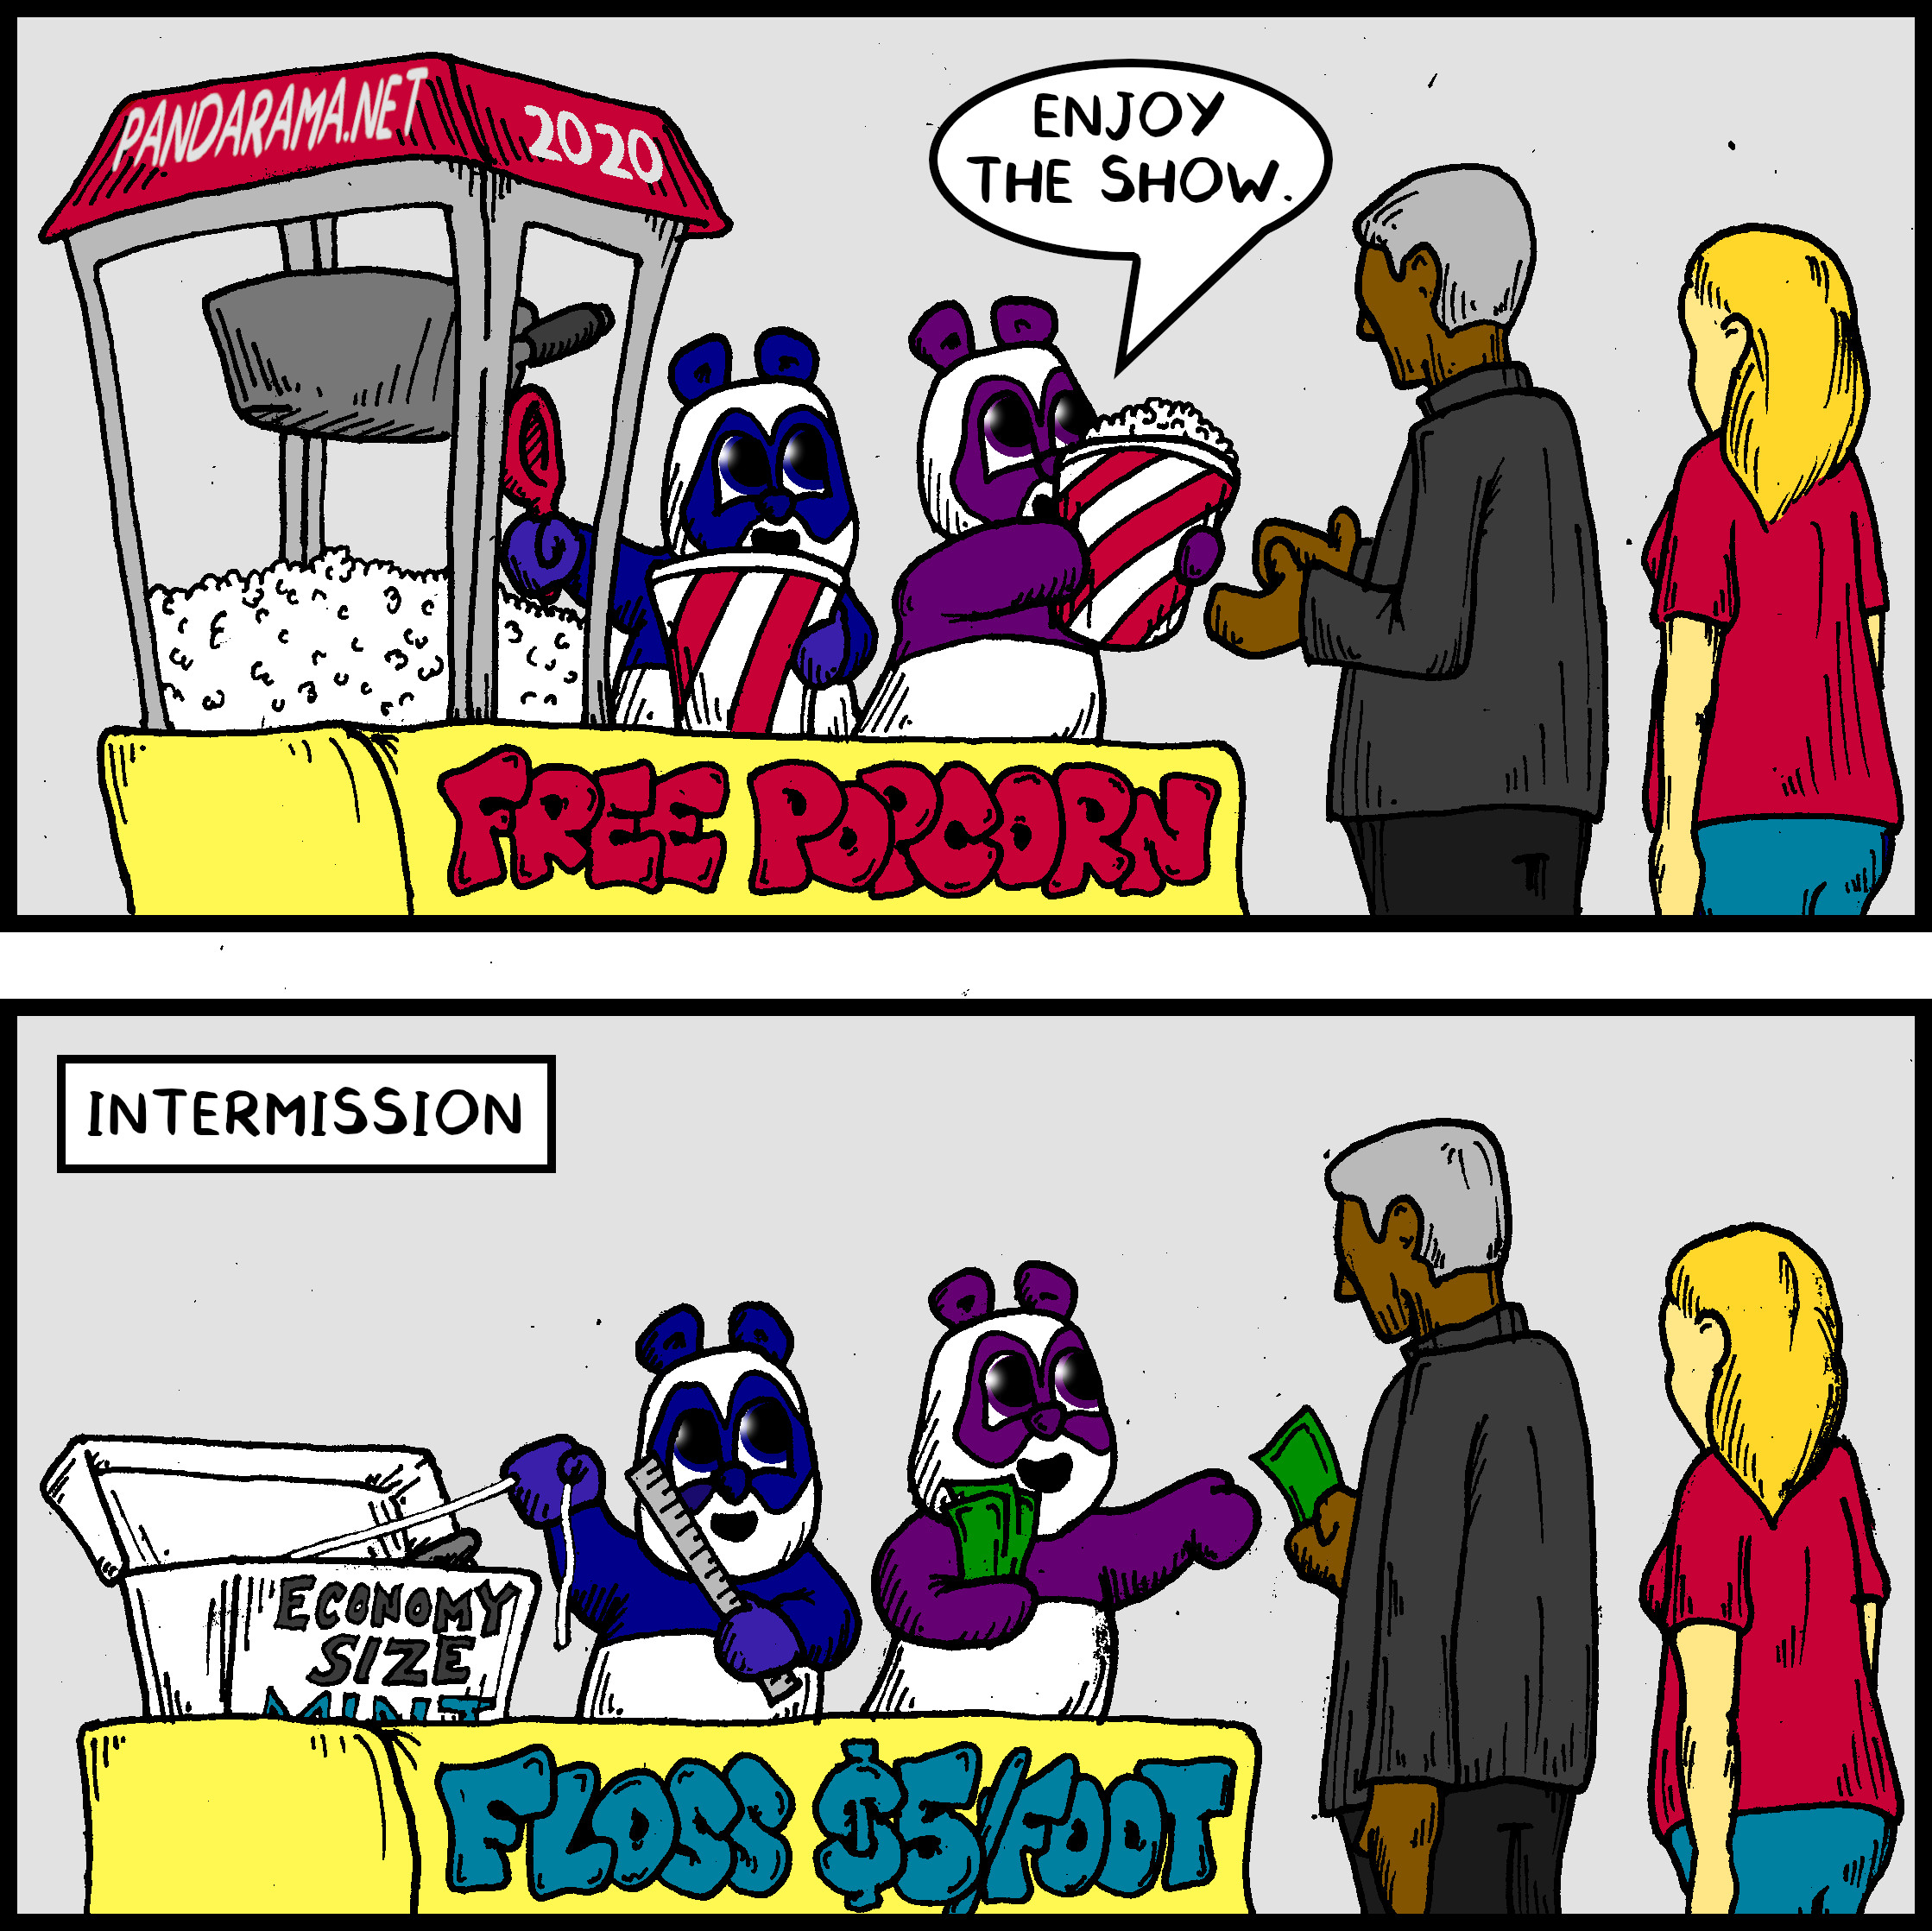 webcomic. pandas give out free popcorn before show. intermission, they sell dental floss by the foot.